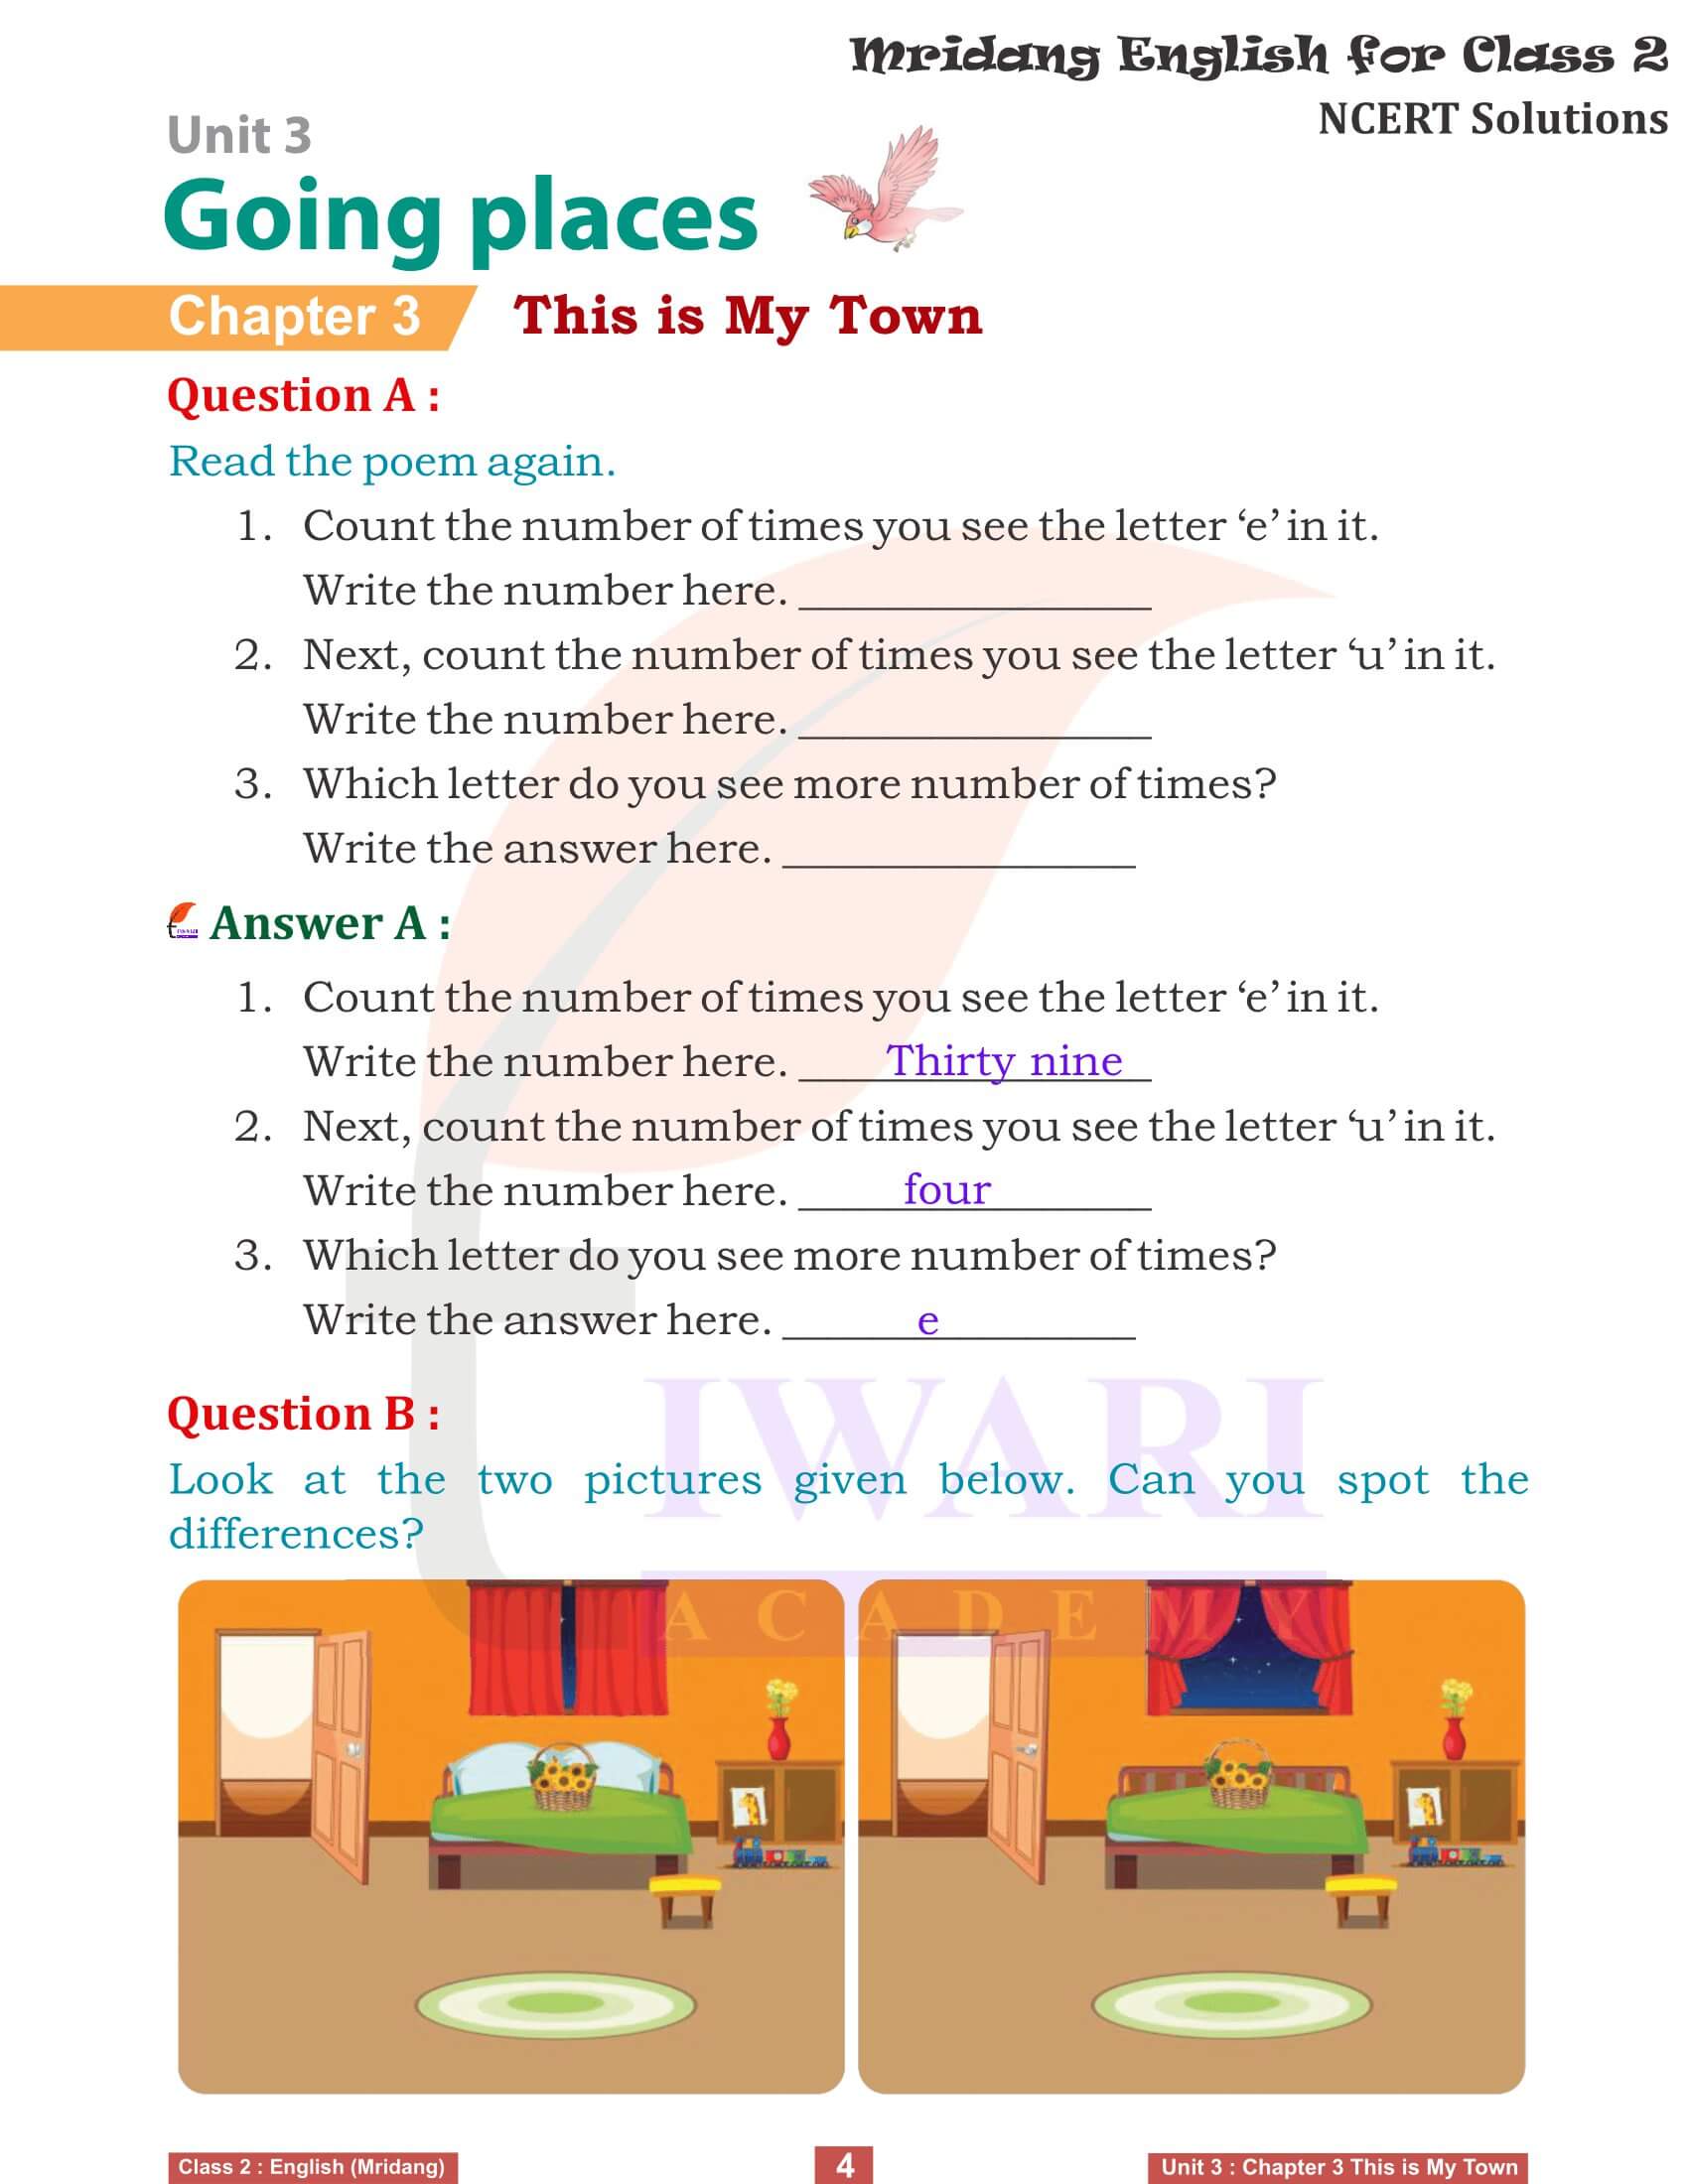 NCERT Solutions for Class 2 English Mridang Unit 3 Going Places Chapter 3 Exercises